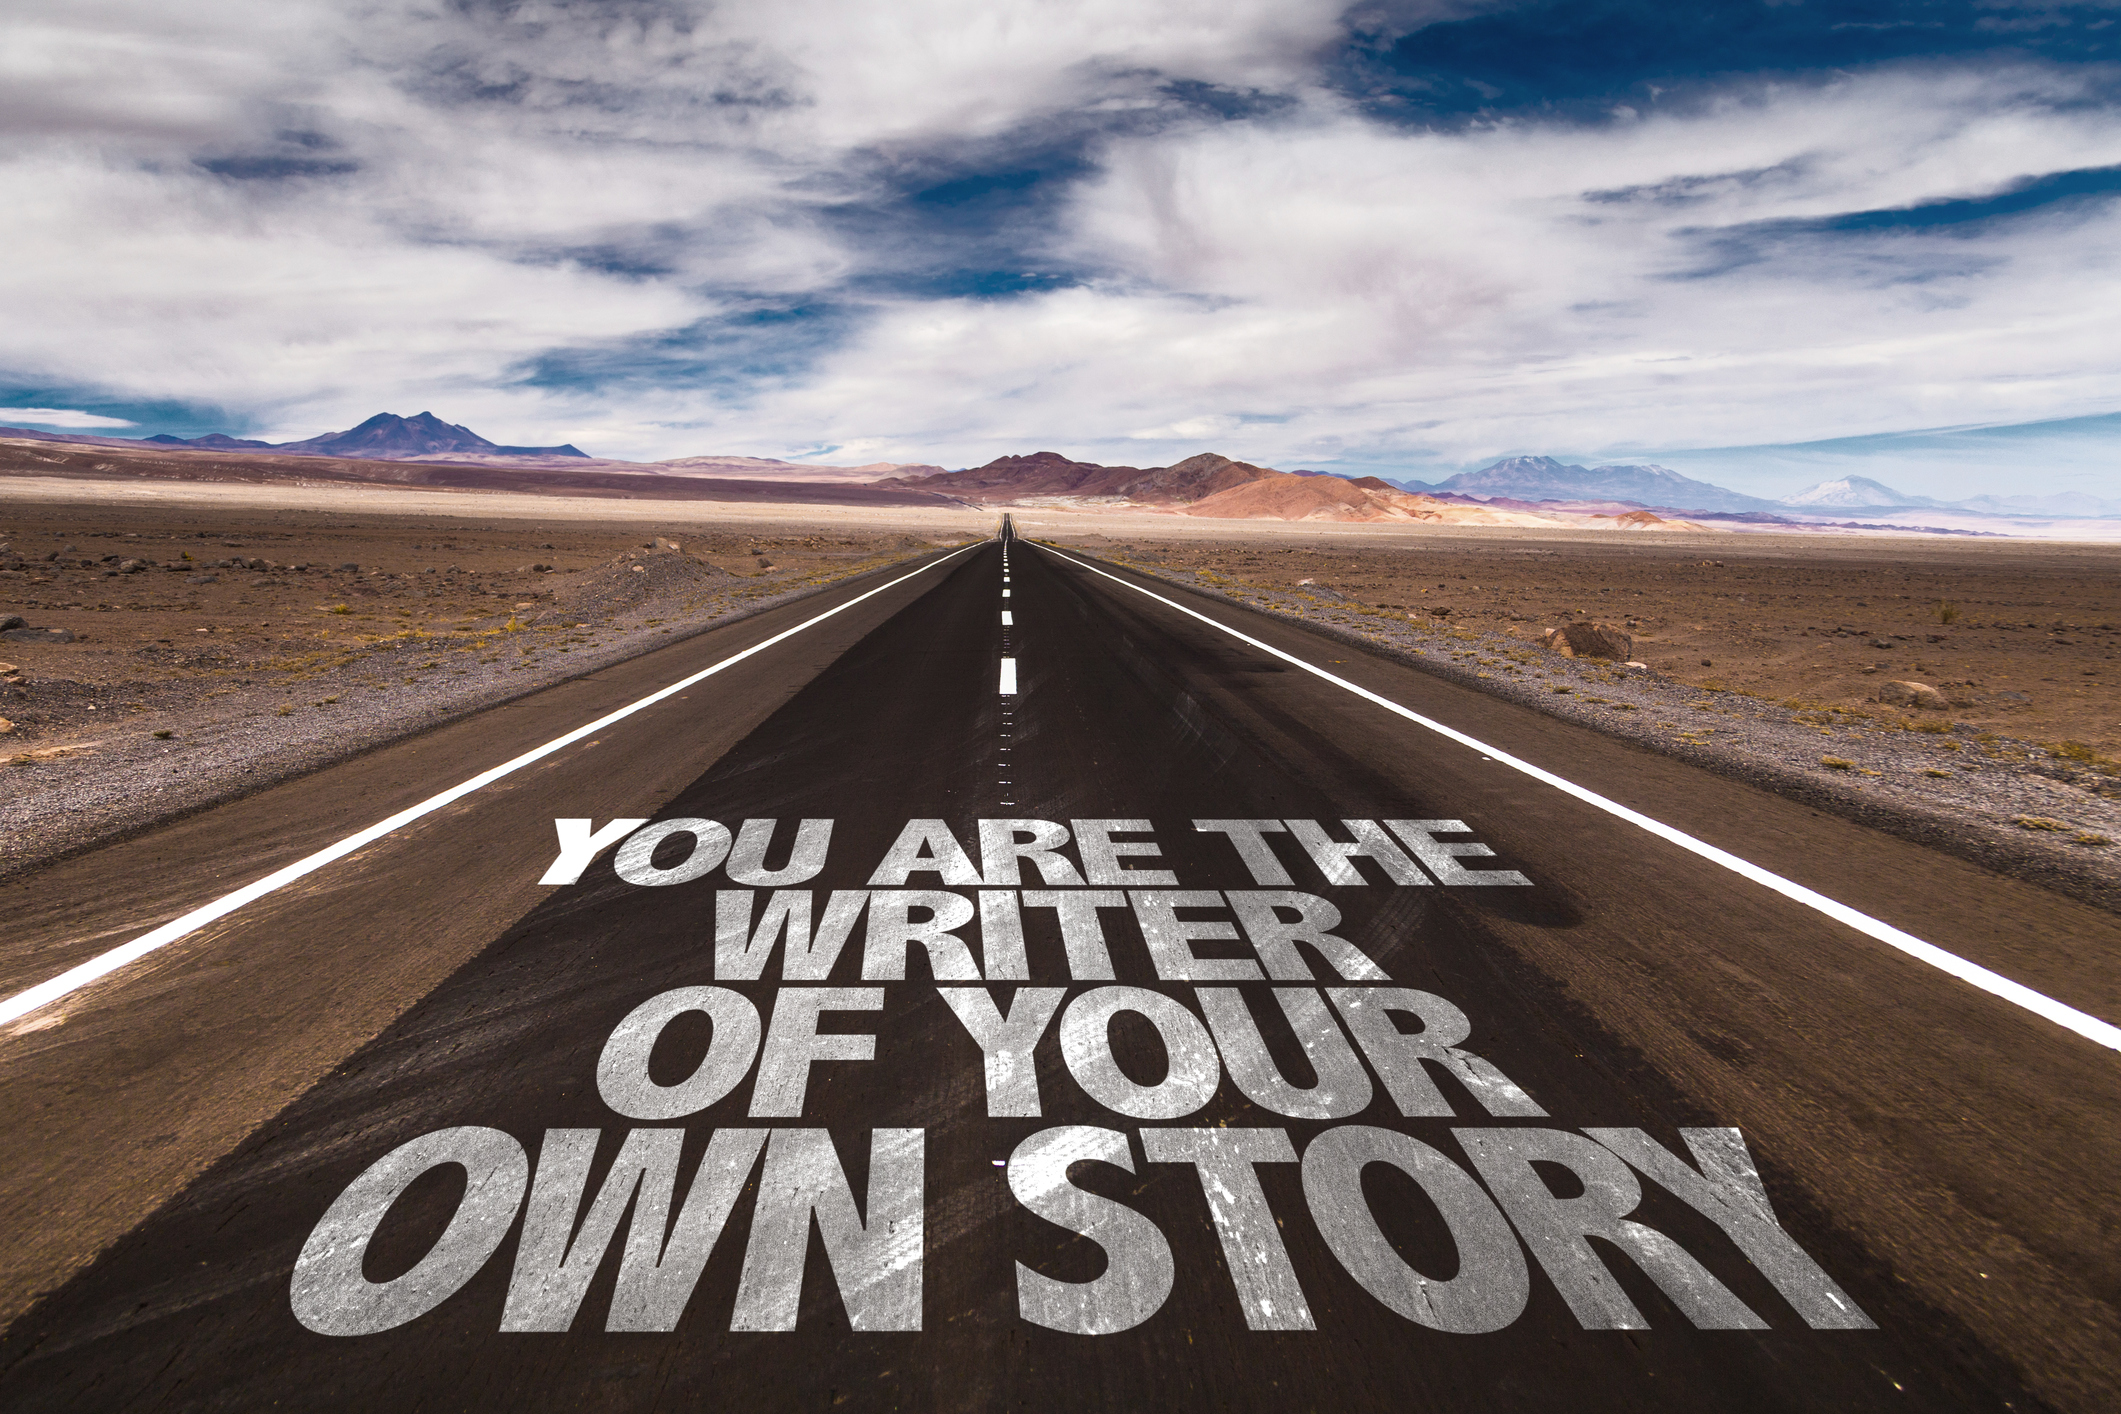 You Are The Writer Of Your Own Story written on desert road